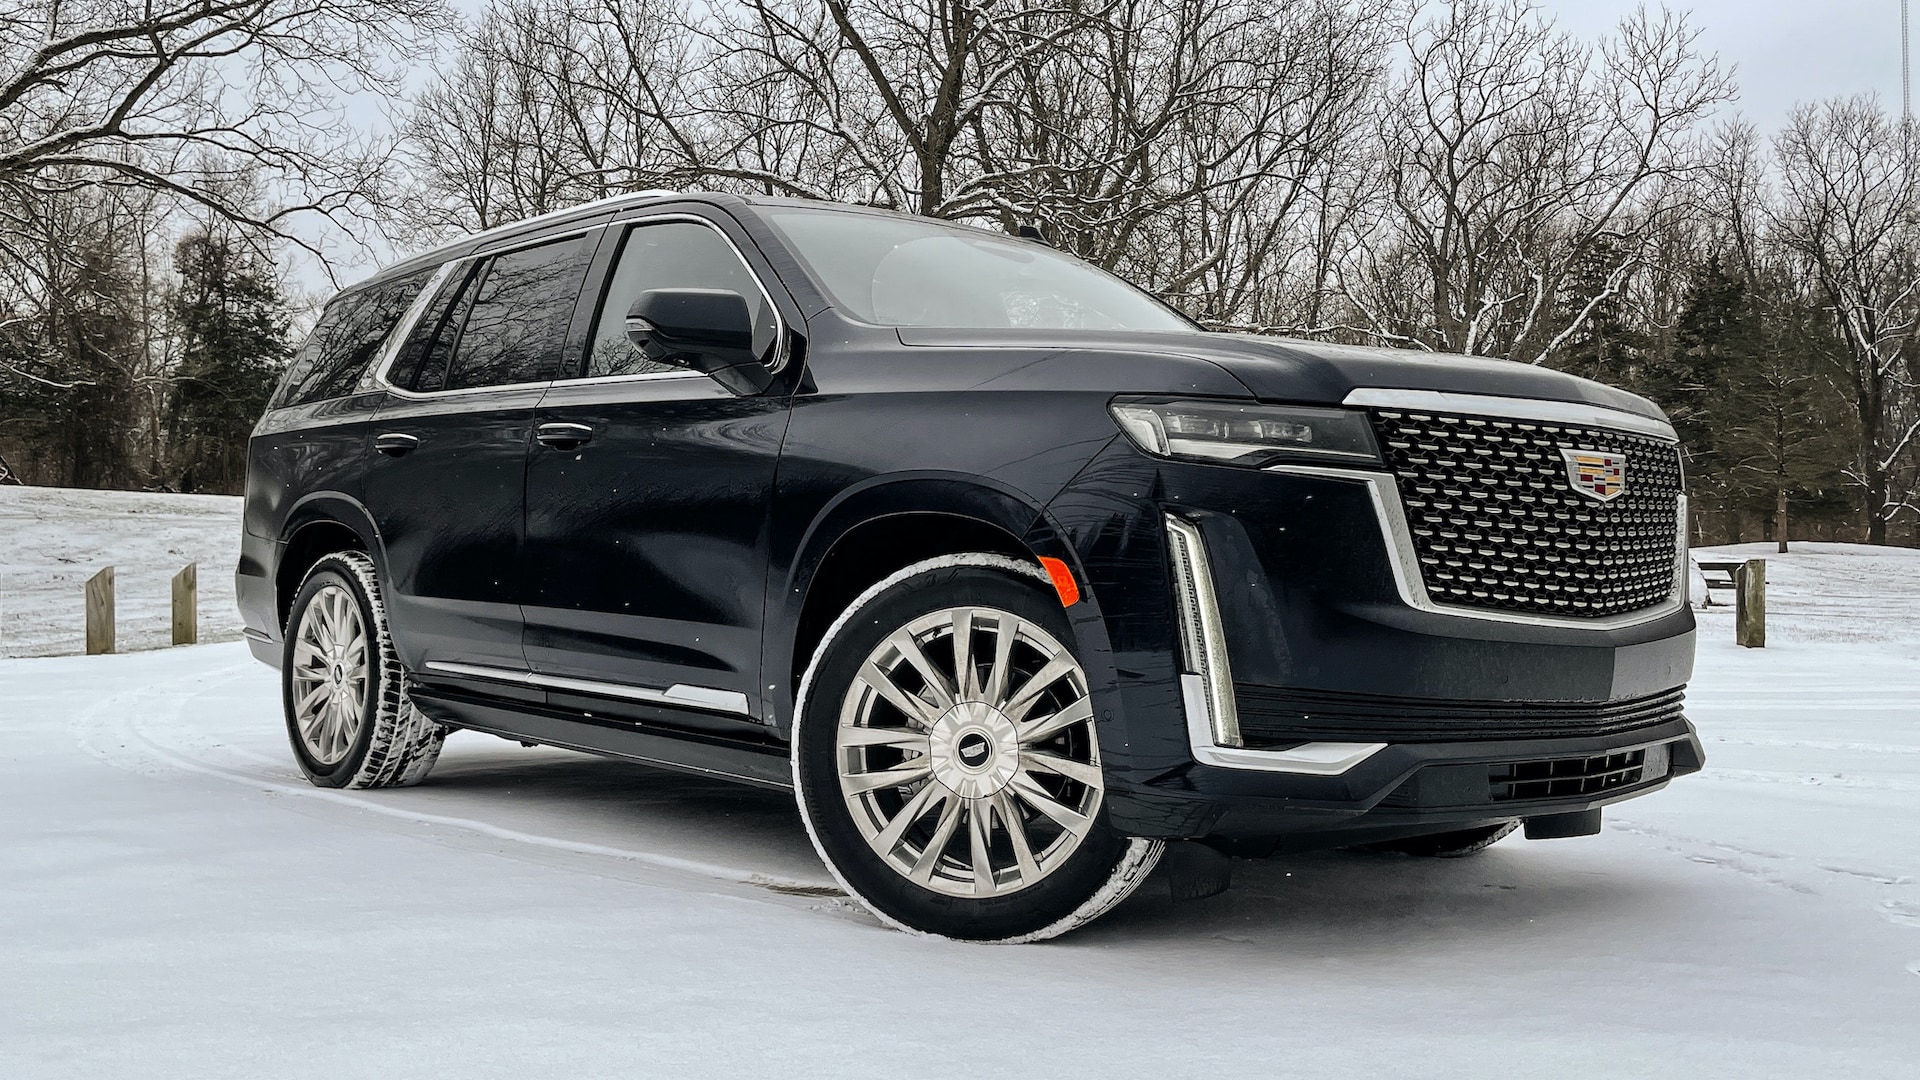 2021 Cadillac Escalade Diesel First Drive Review: The Power of Choice